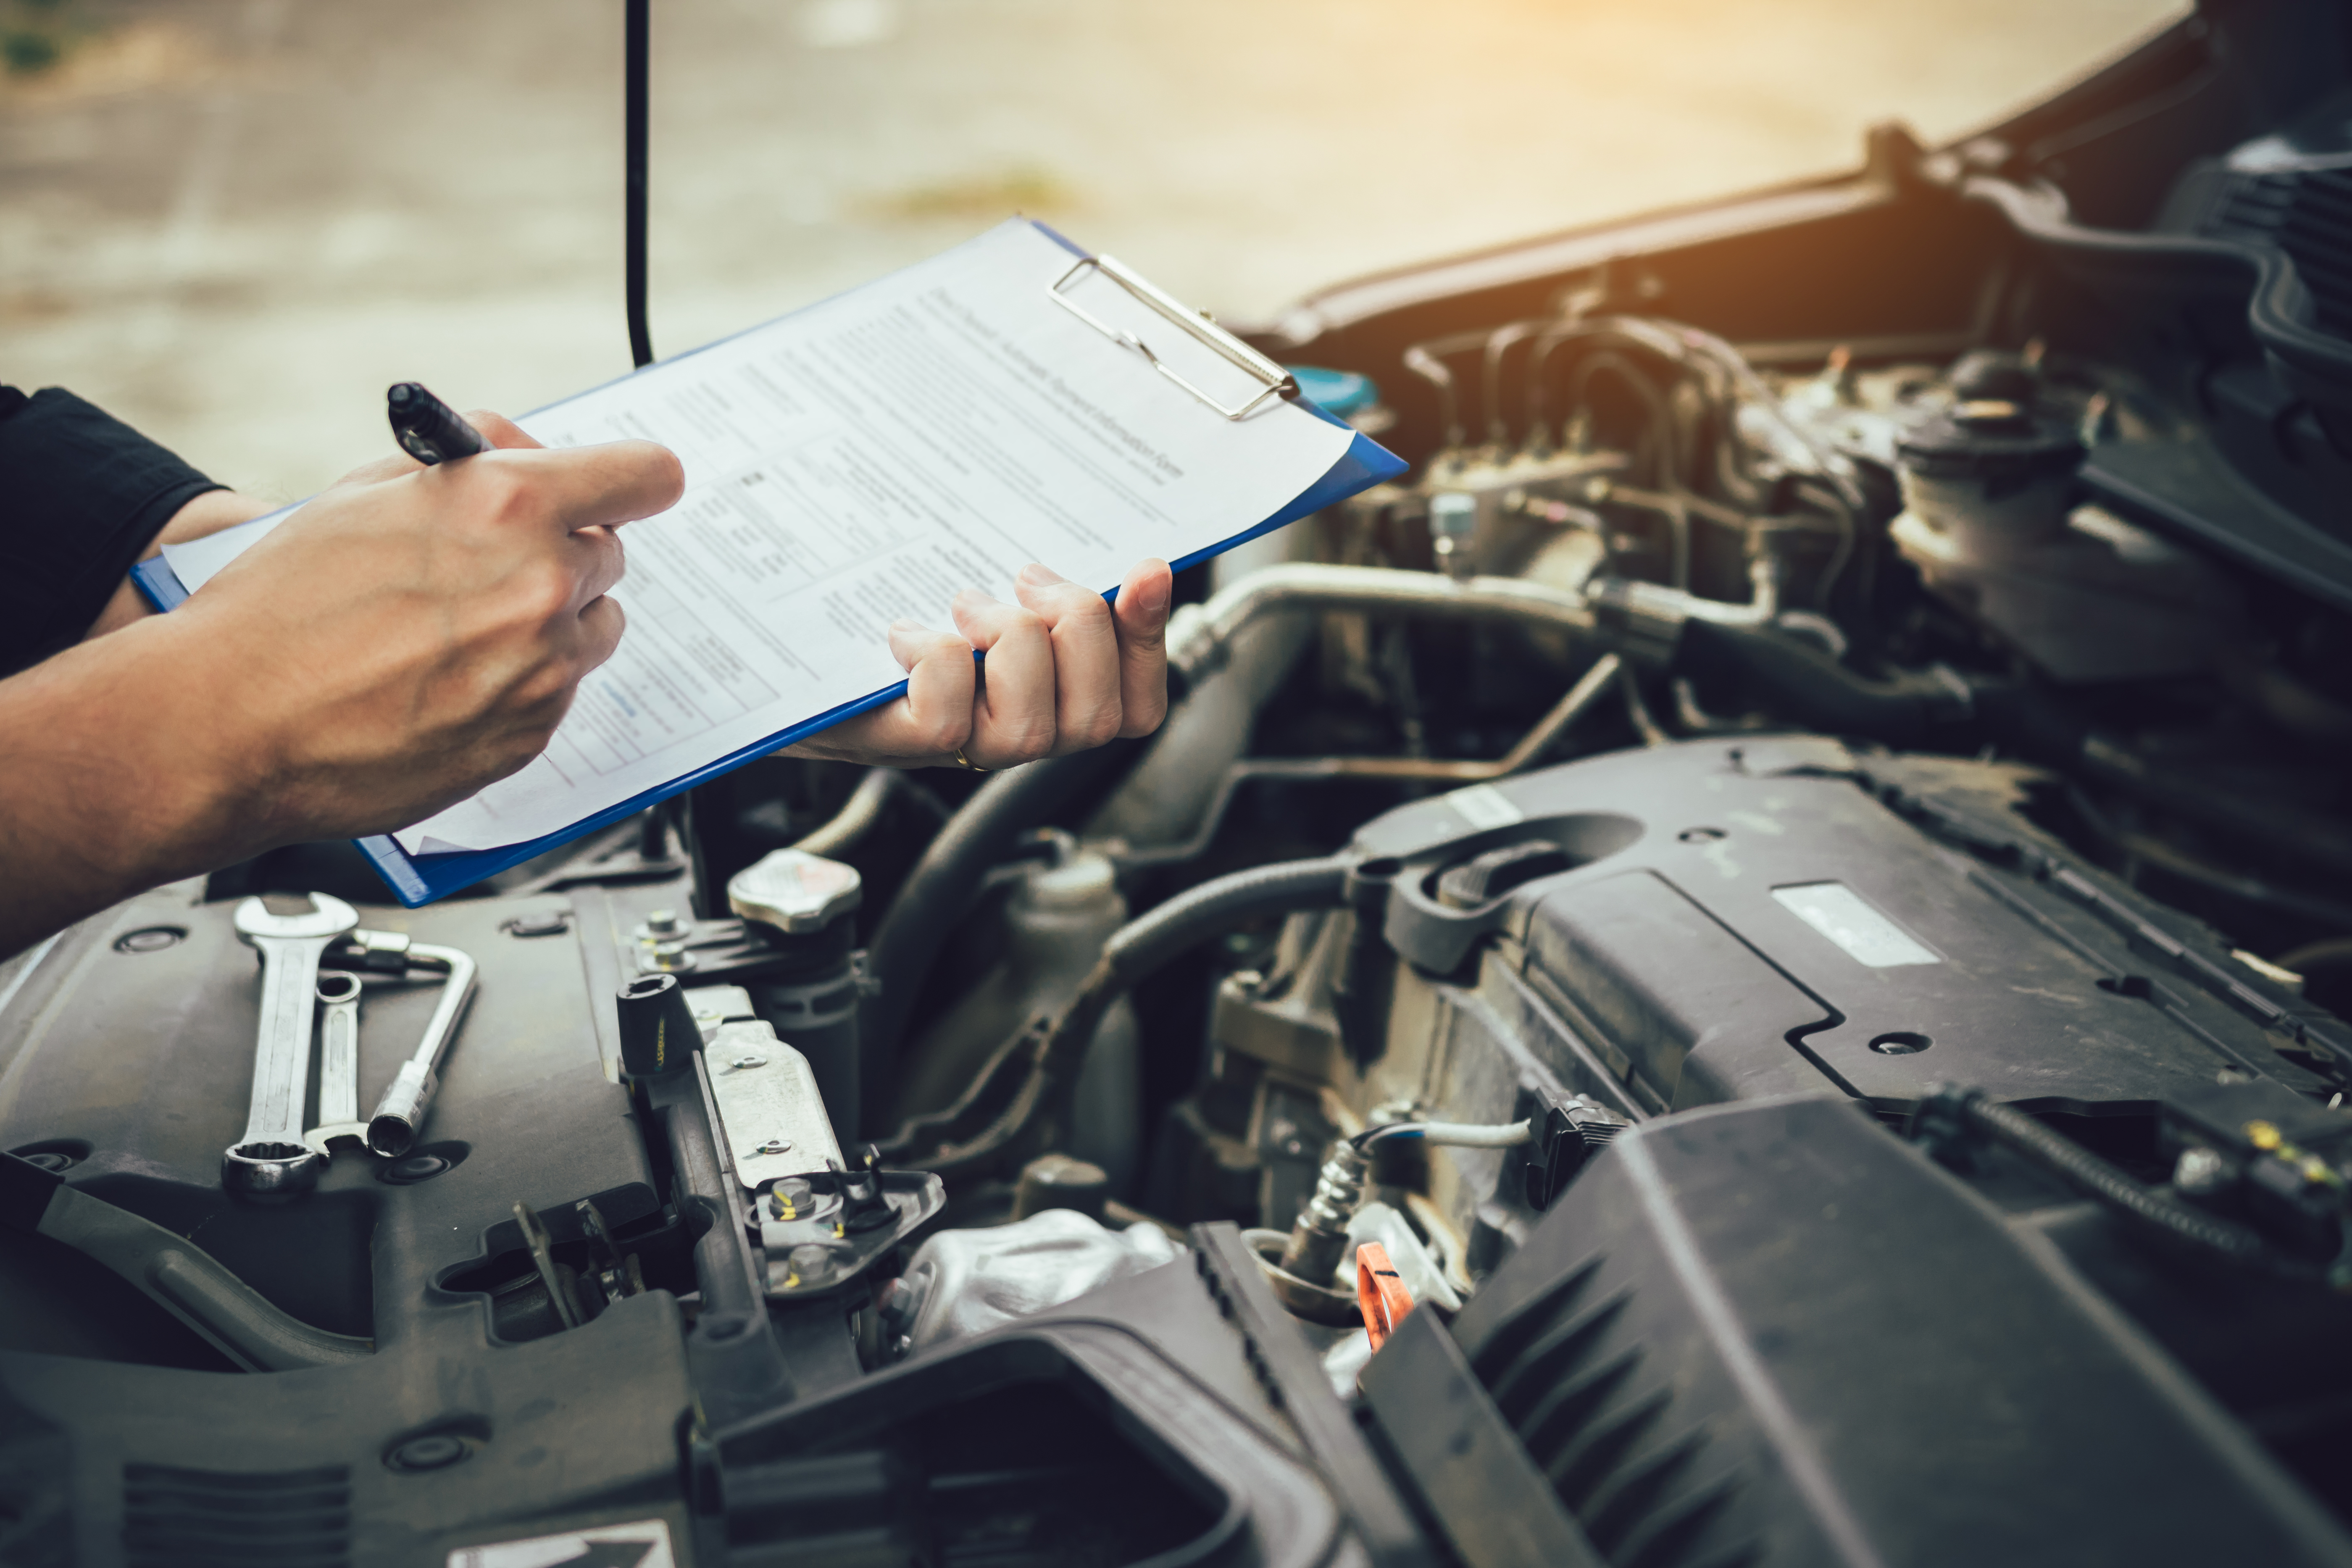 Car Mechanic Repairing Vehicle Engine And Listing Details